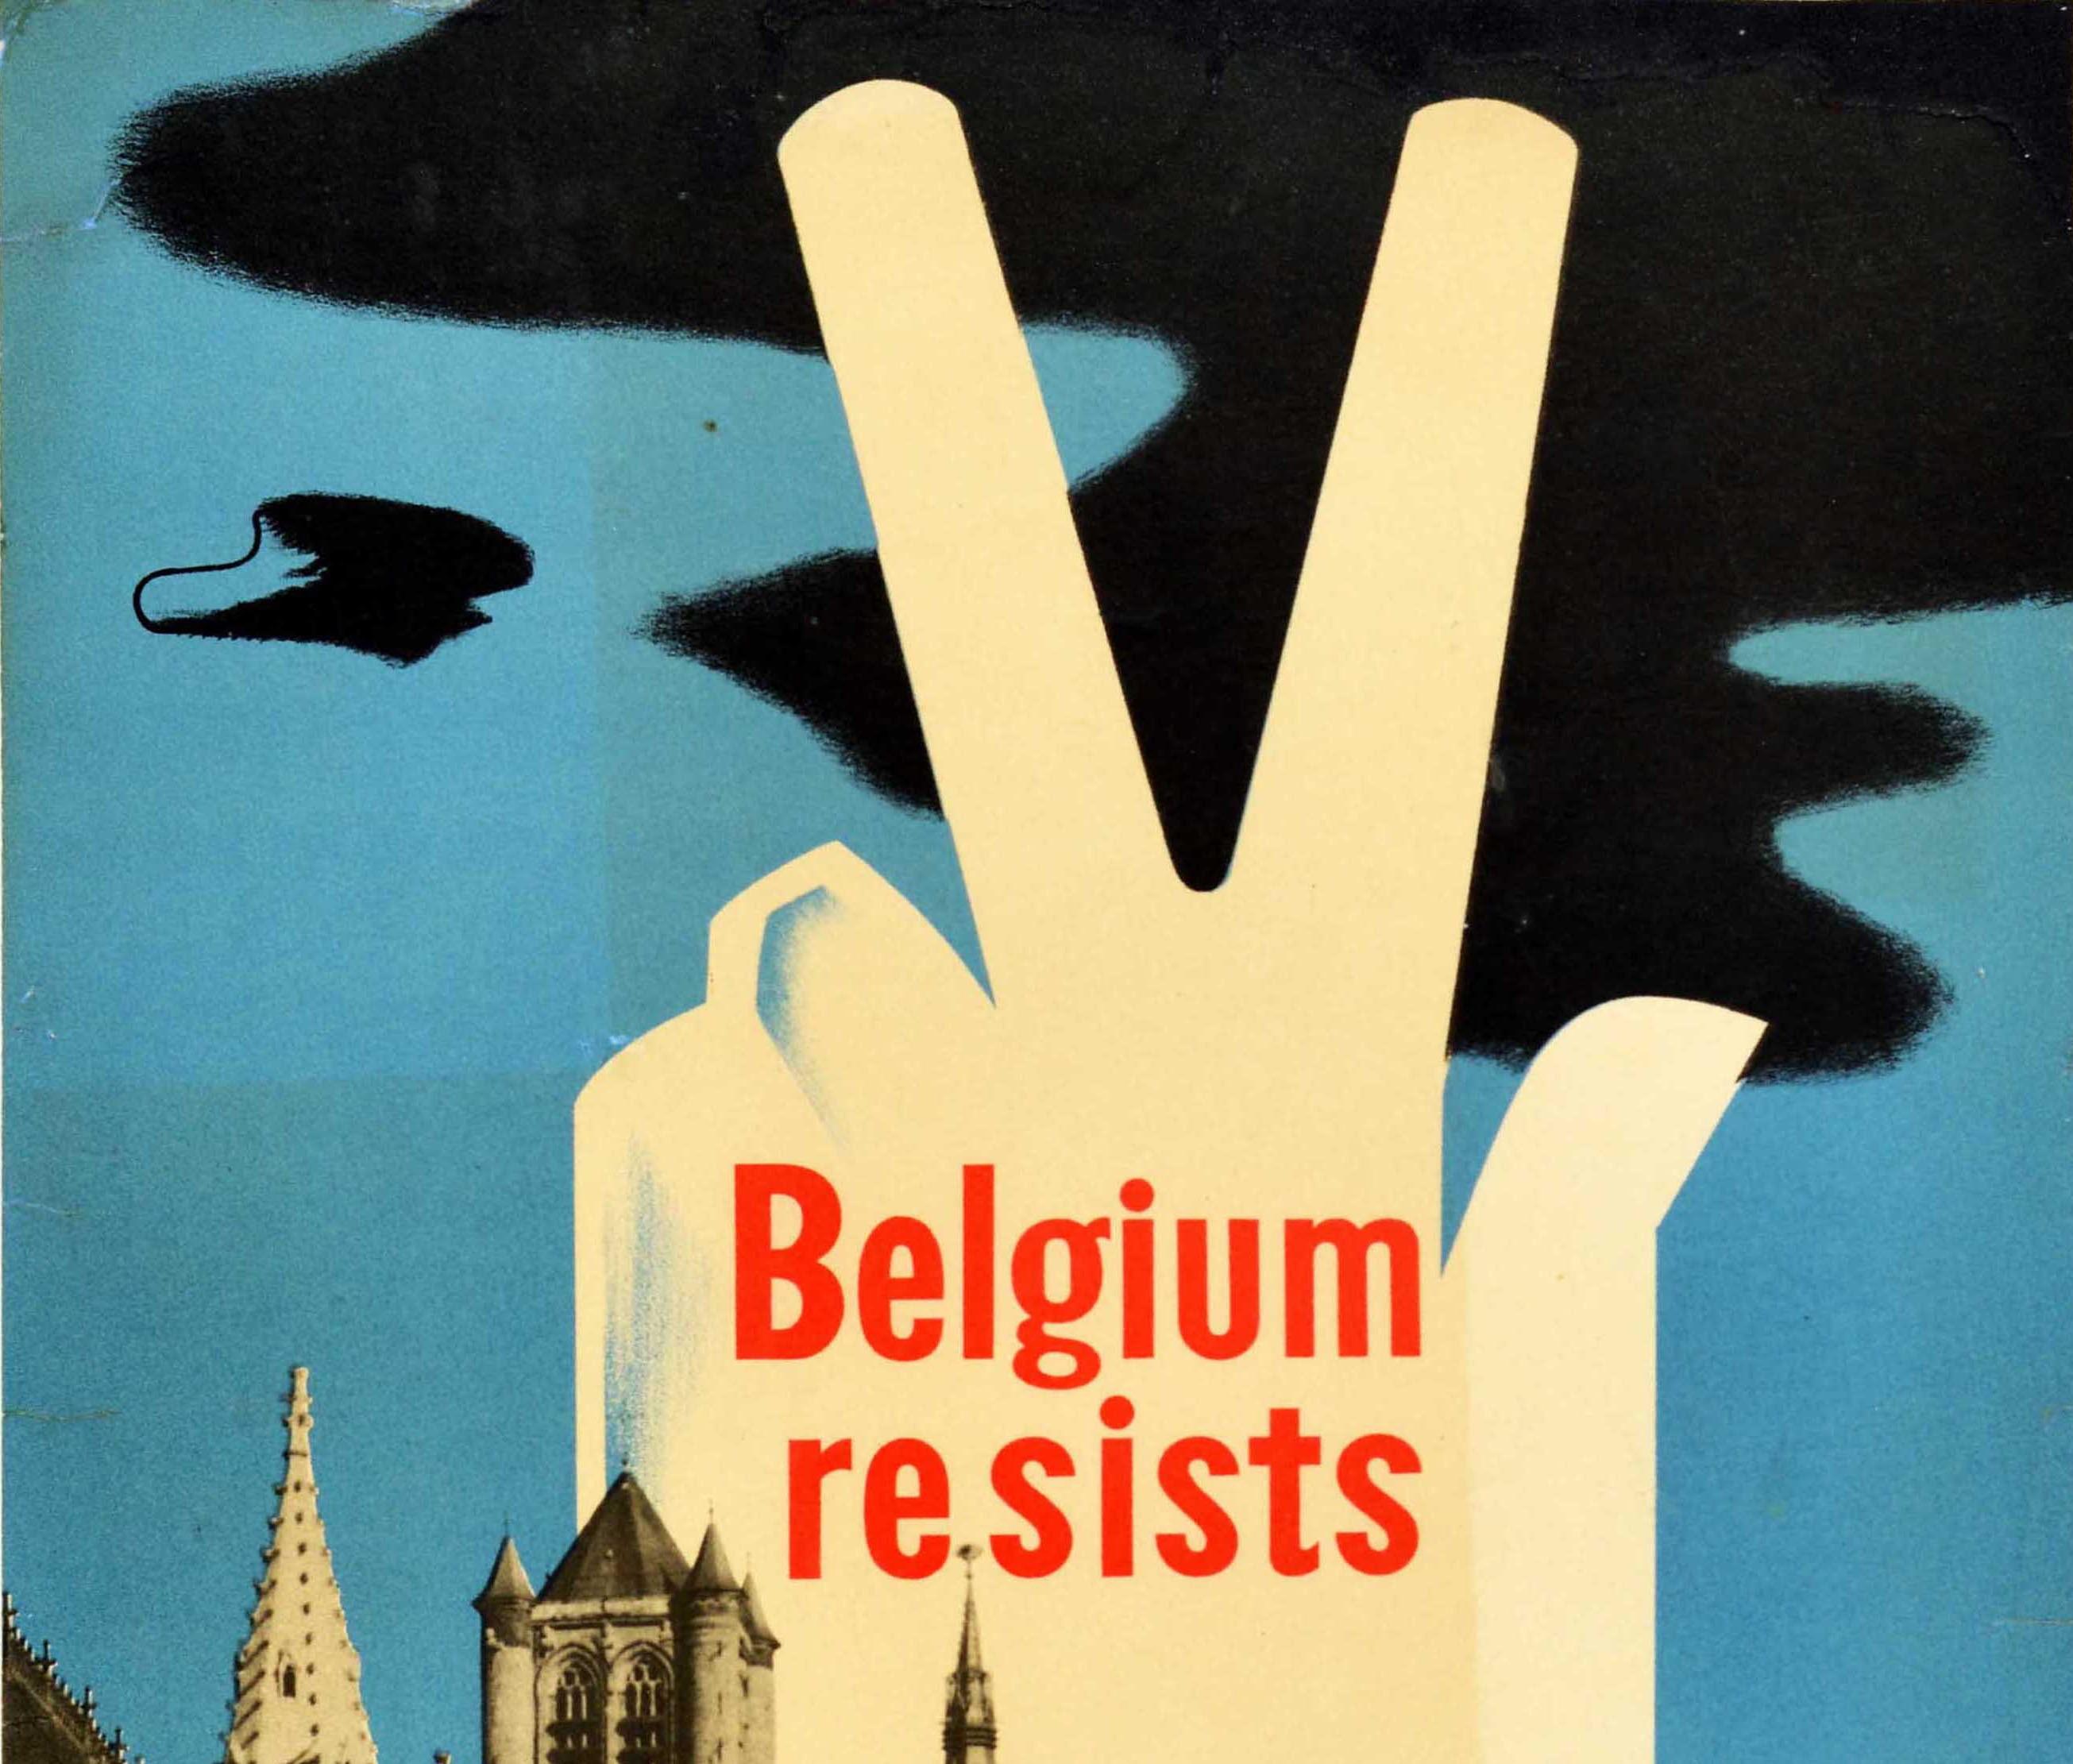 Original vintage Belgian World War Two poster - Belgium Resists - issued by The Belgian War Relief Society Inc of the United States of America Member Agency in the National War Fund 420 Lexington Avenue New York. Design features a stylised hand